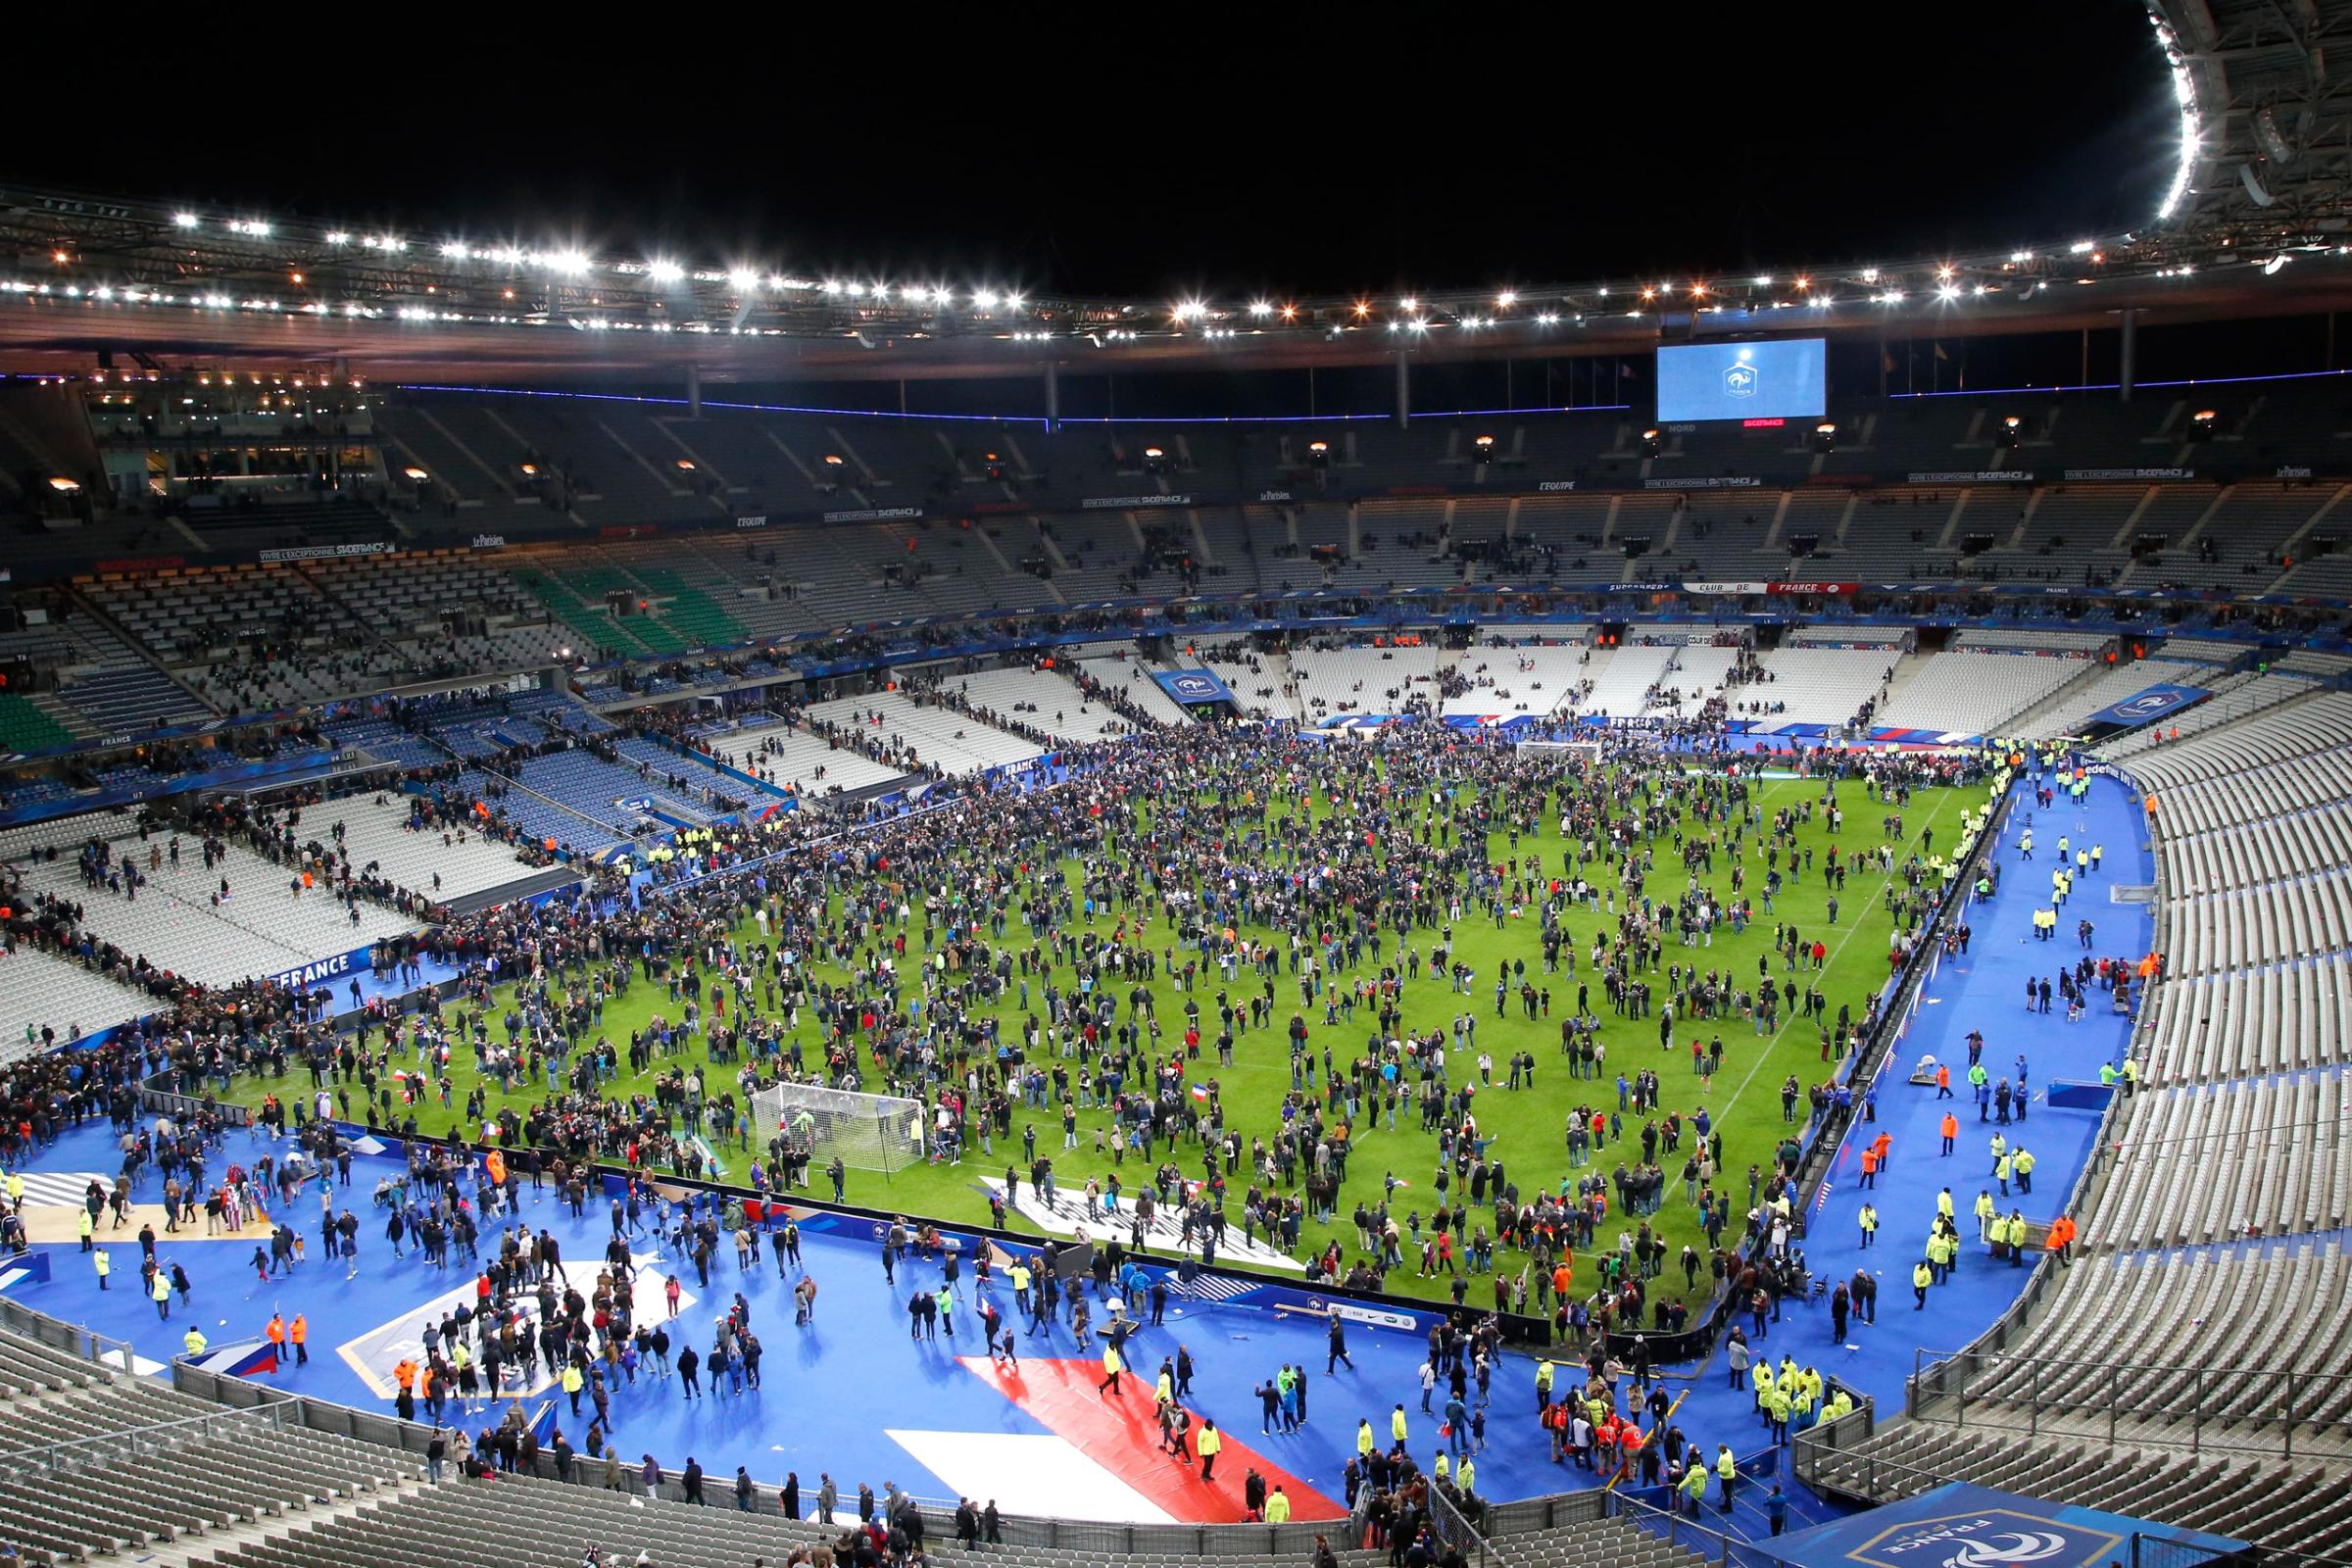 Spectators invade the pitch of the Stade de France stadium after the international friendly soccer France against Germany, Friday, Nov. 13, 2015 in Saint Denis, outside Paris. At least 35 people were killed in shootings and explosions around Paris, many of them in a popular theater where patrons were taken hostage, police and medical officials said Friday. Two explosions were heard outside the Stade de France stadium. (AP Photo/Michel Euler)